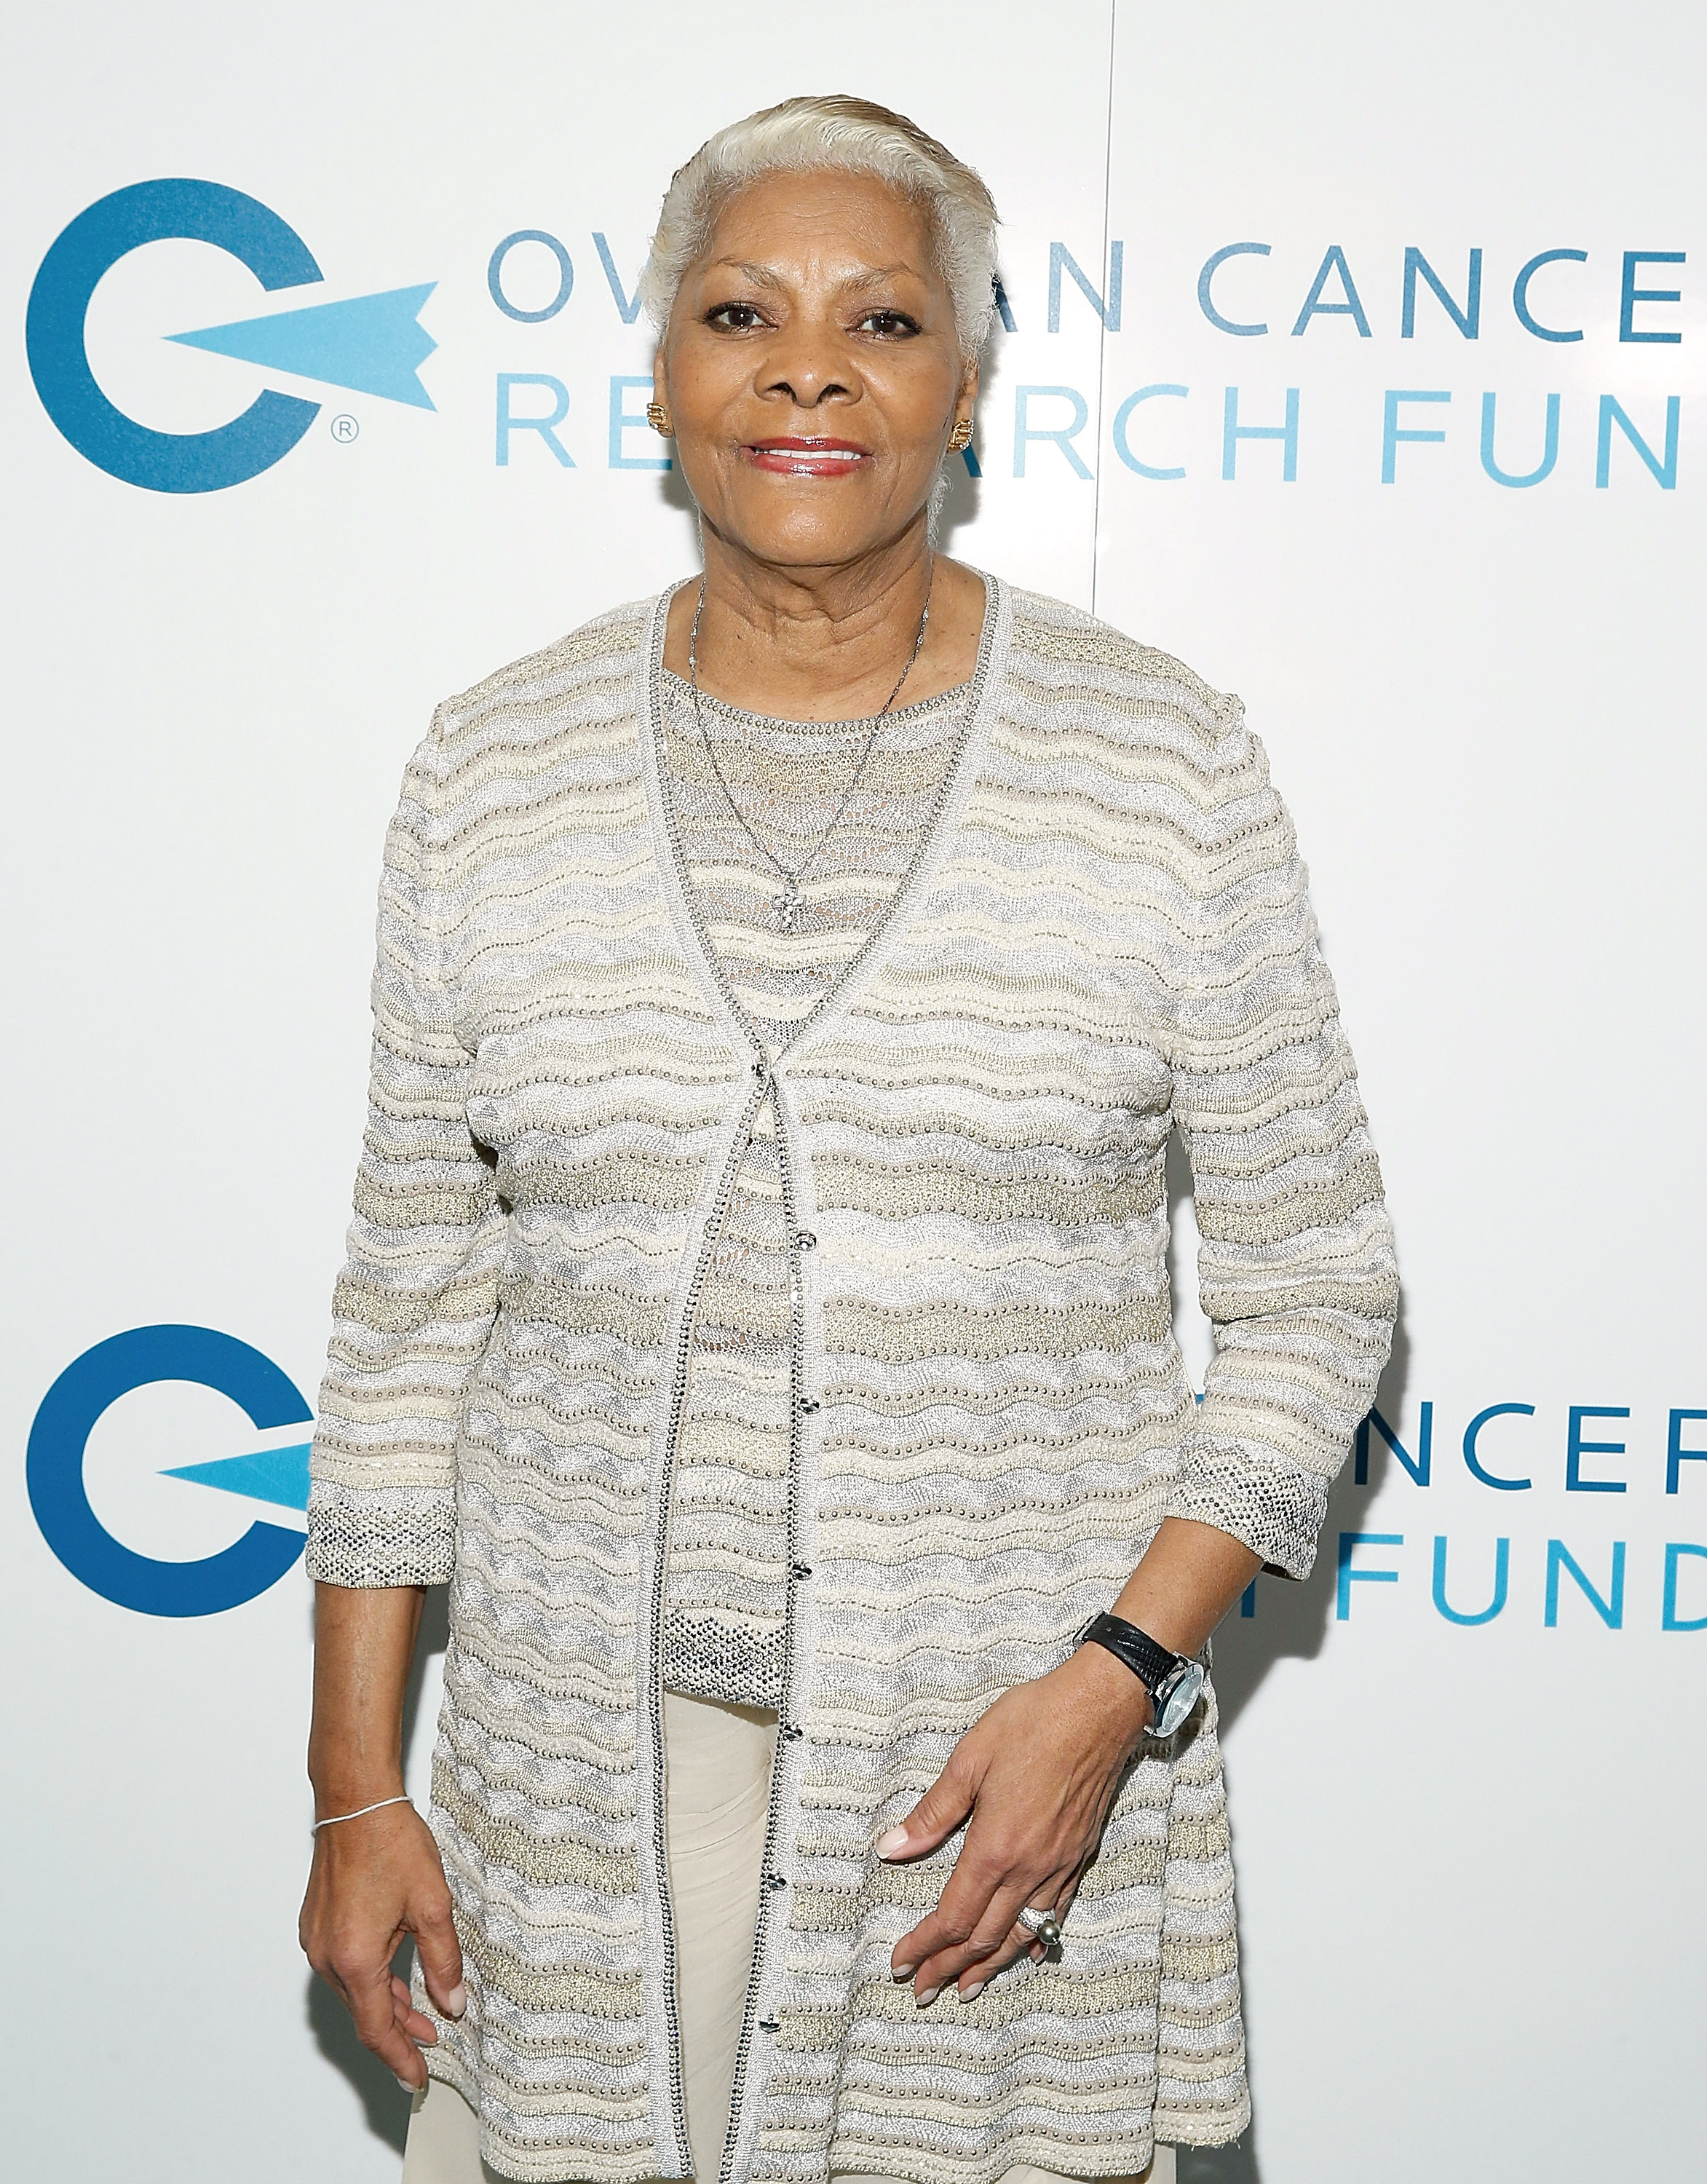 Dionne Warwick has been a long-time advocate for healthcare causes